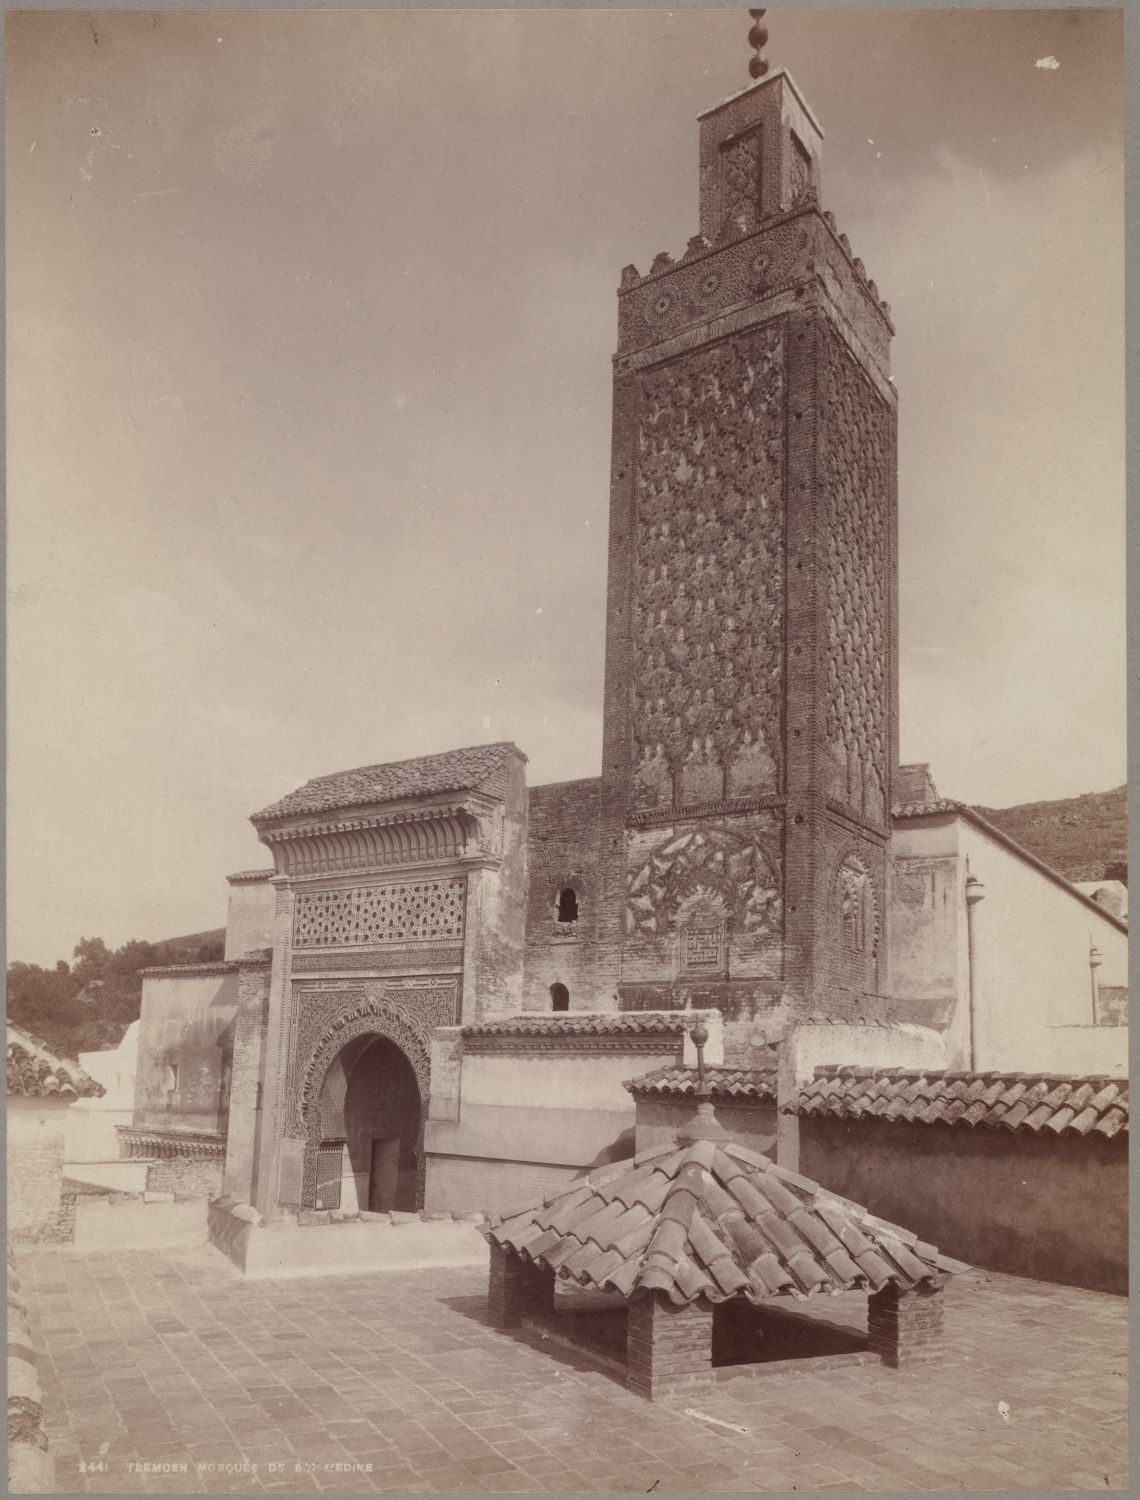 View of the main entrance and minaret